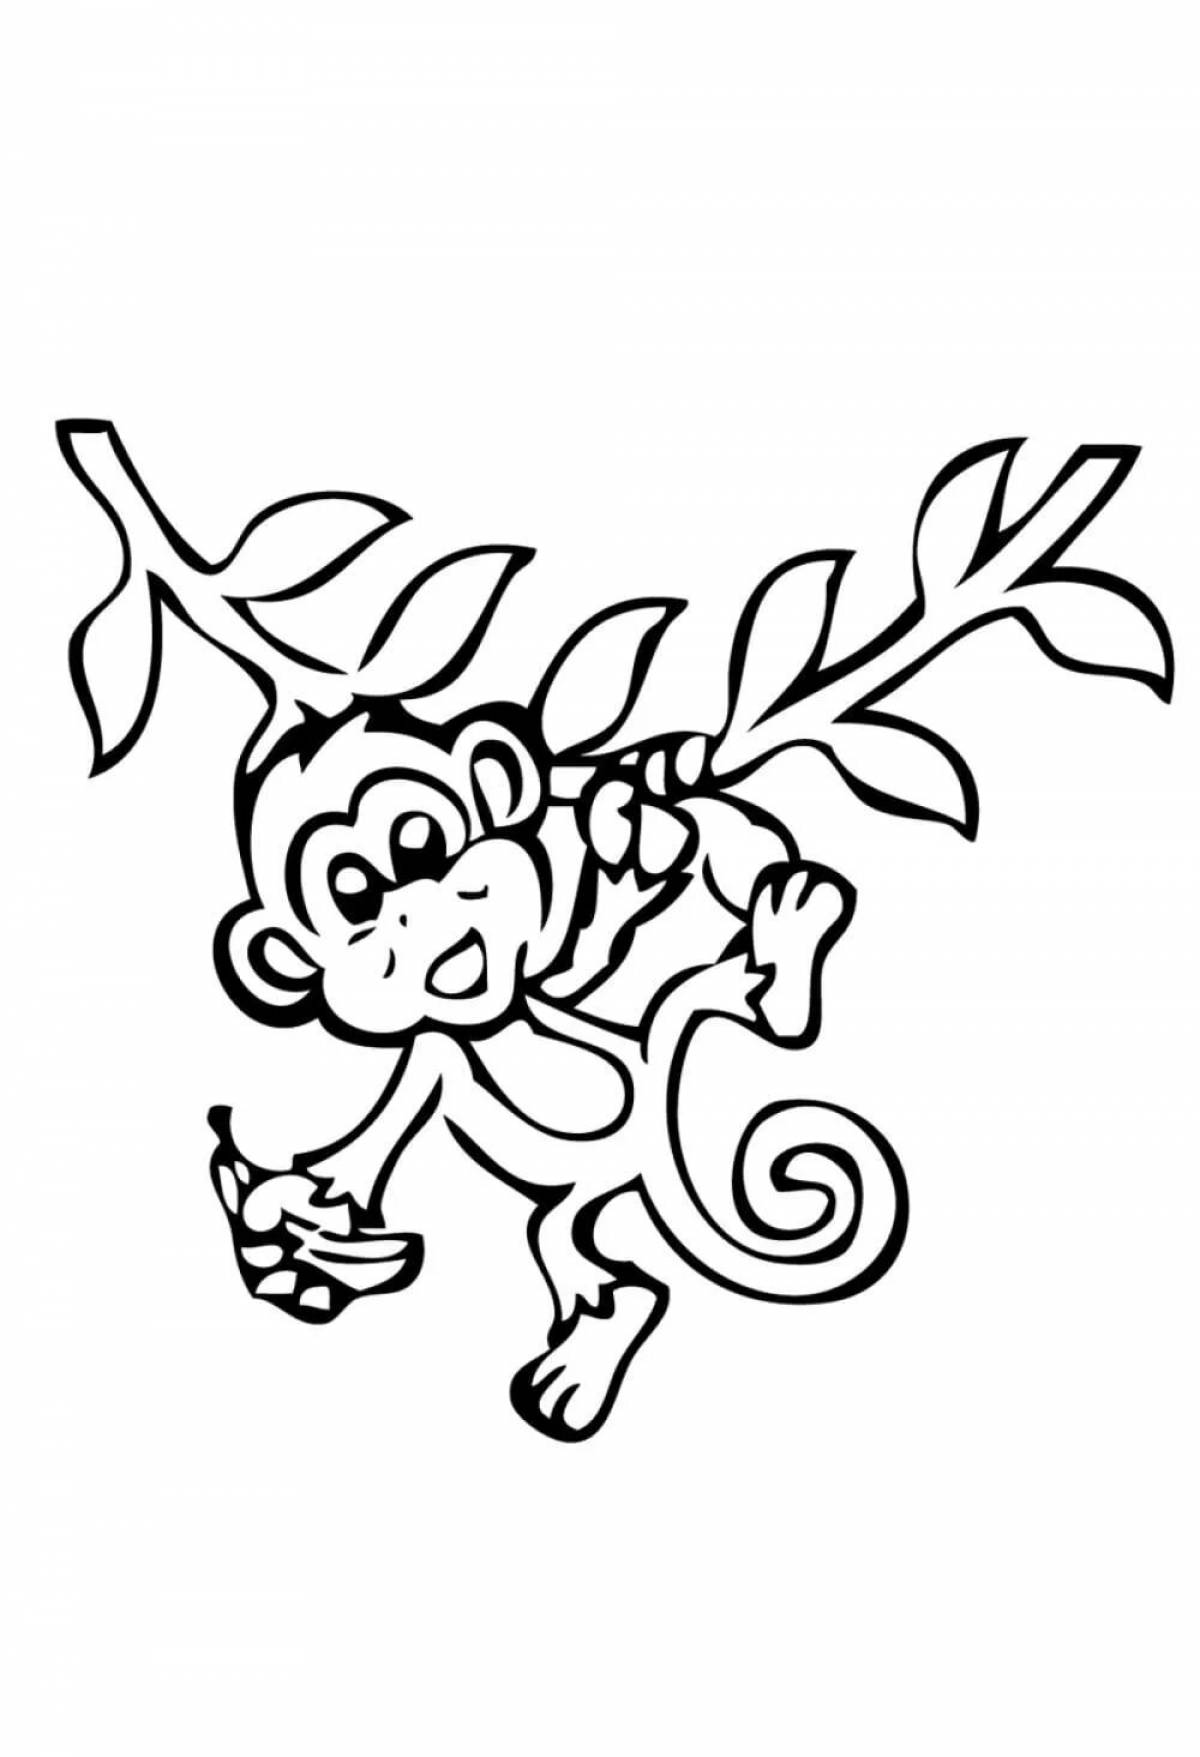 Gorgeous monkey figurine coloring page